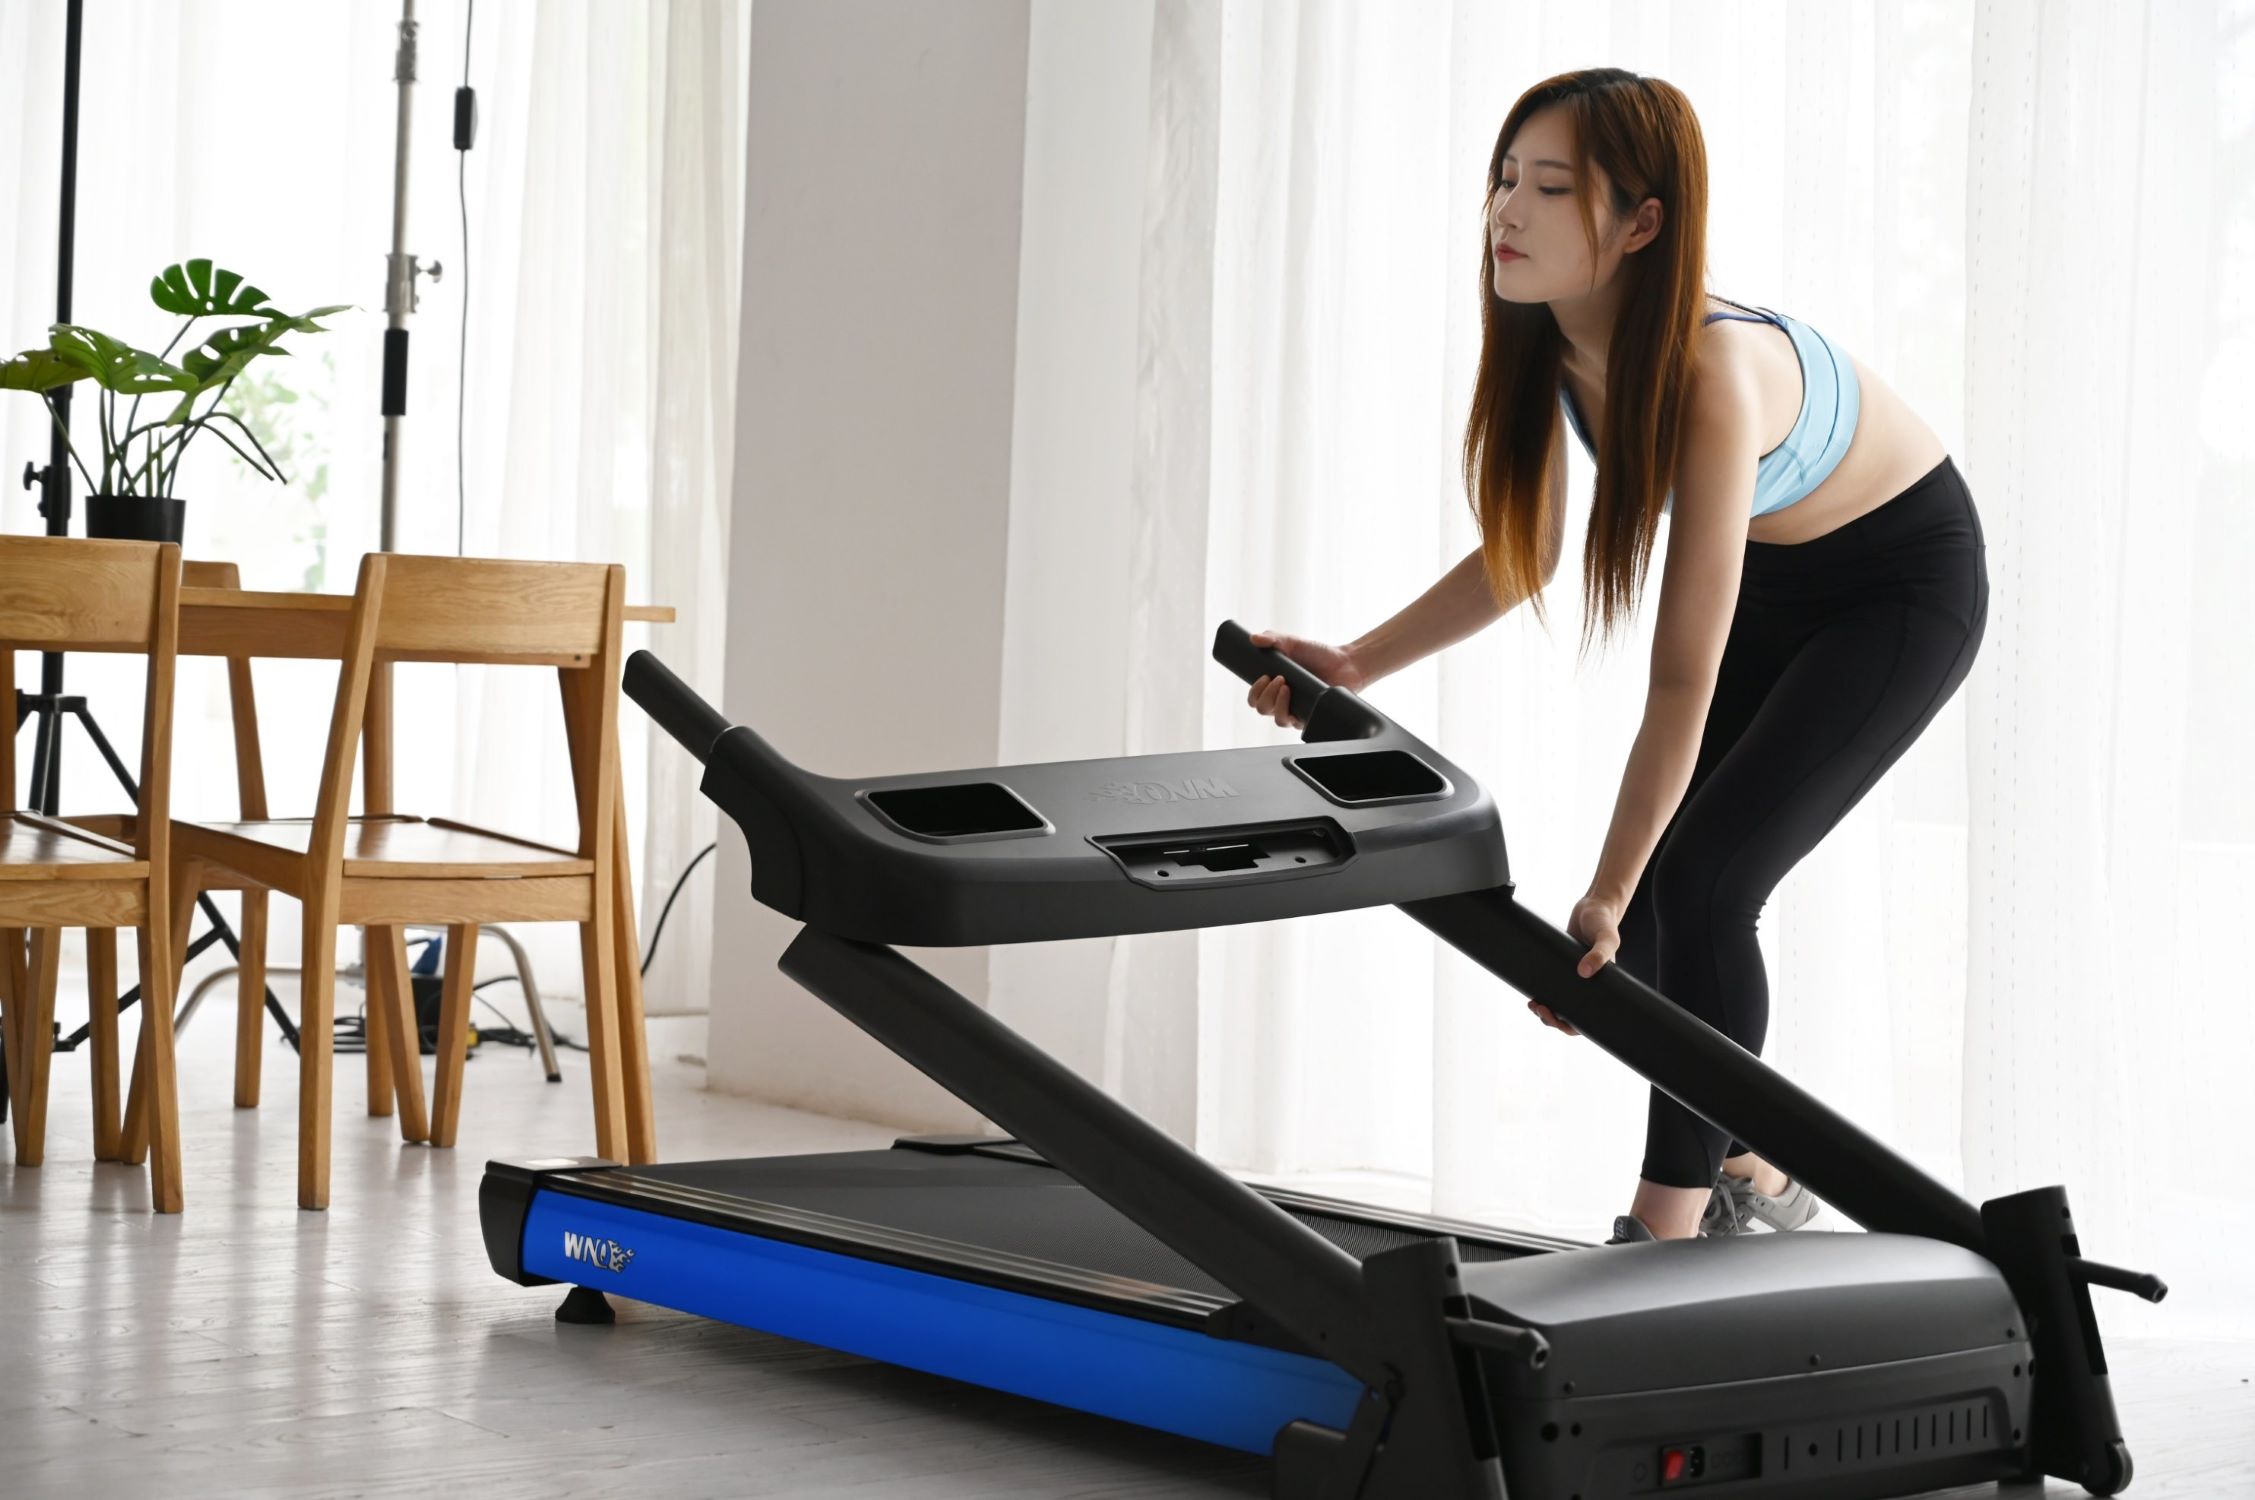 How To Assemble A Treadmill